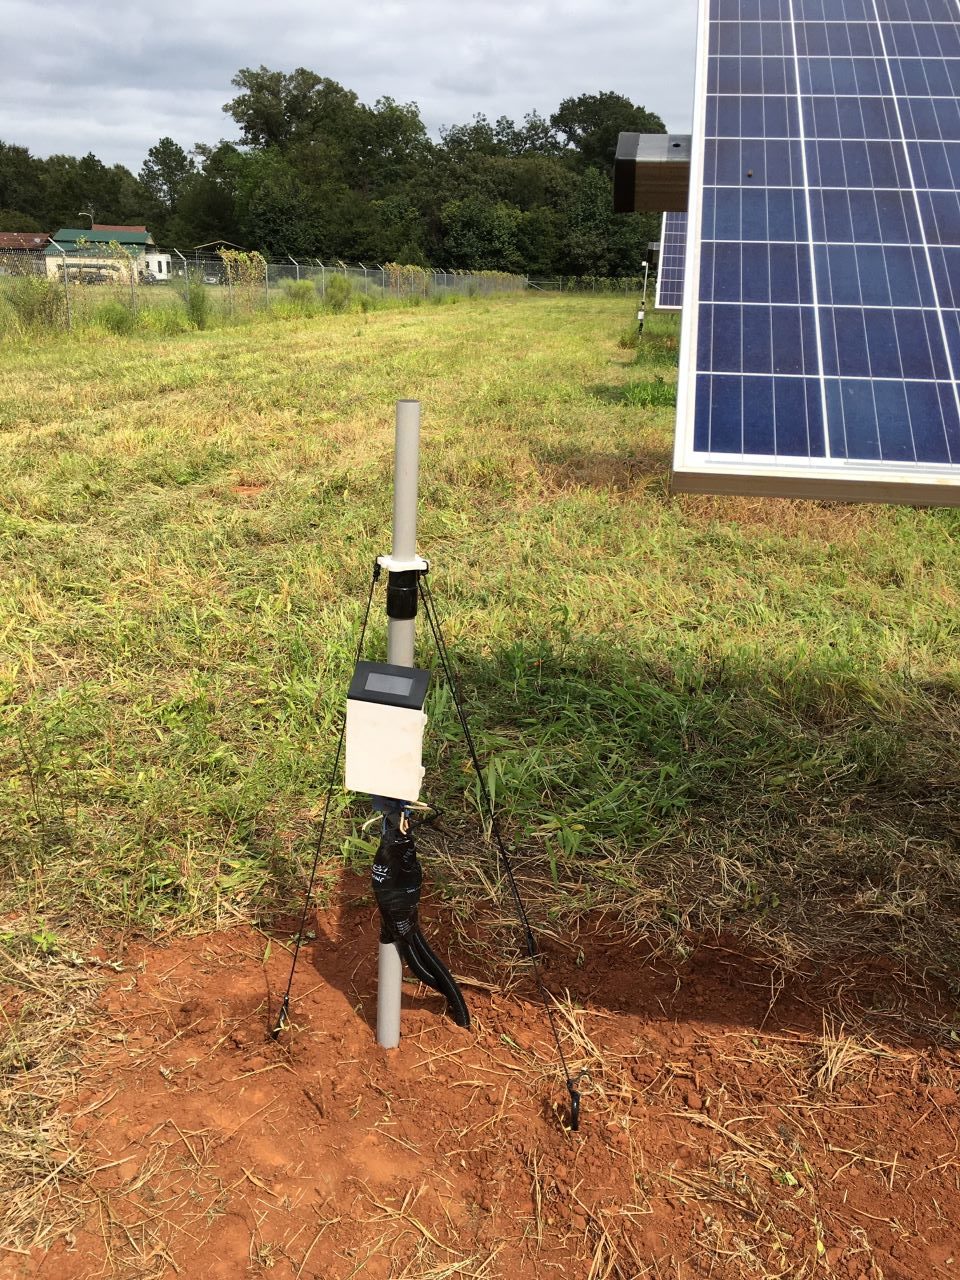 A water gauge for monitoring precipitation sticks out of red clay soil with green grass and trees behind it and the edge of a solar array peeking through on its right side.